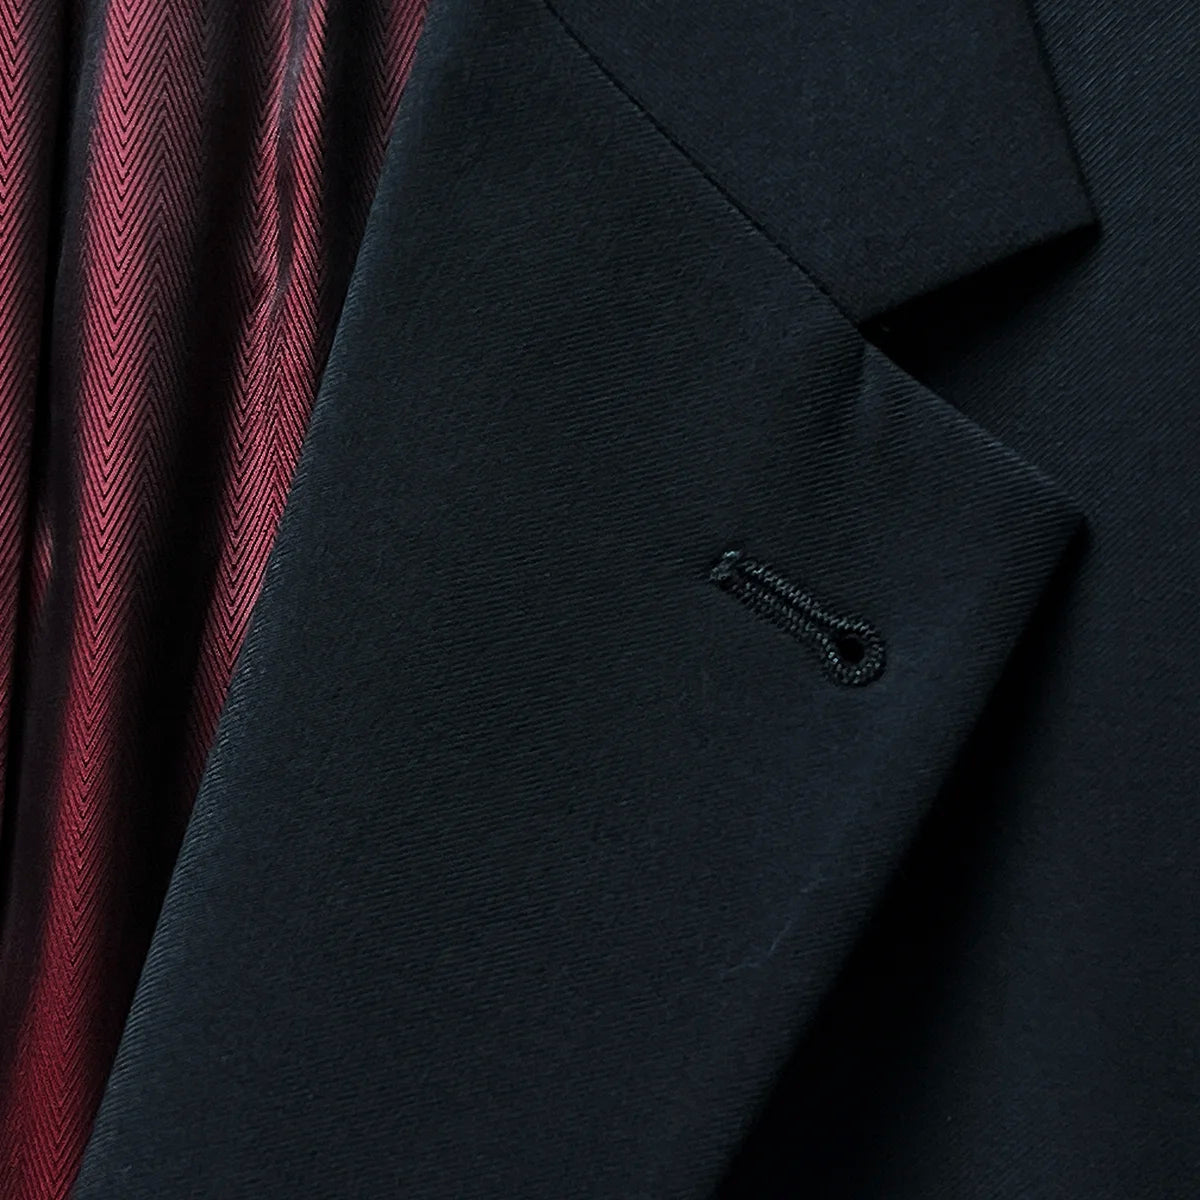 Detailed view of the notch lapel showcasing the sleek and refined design.